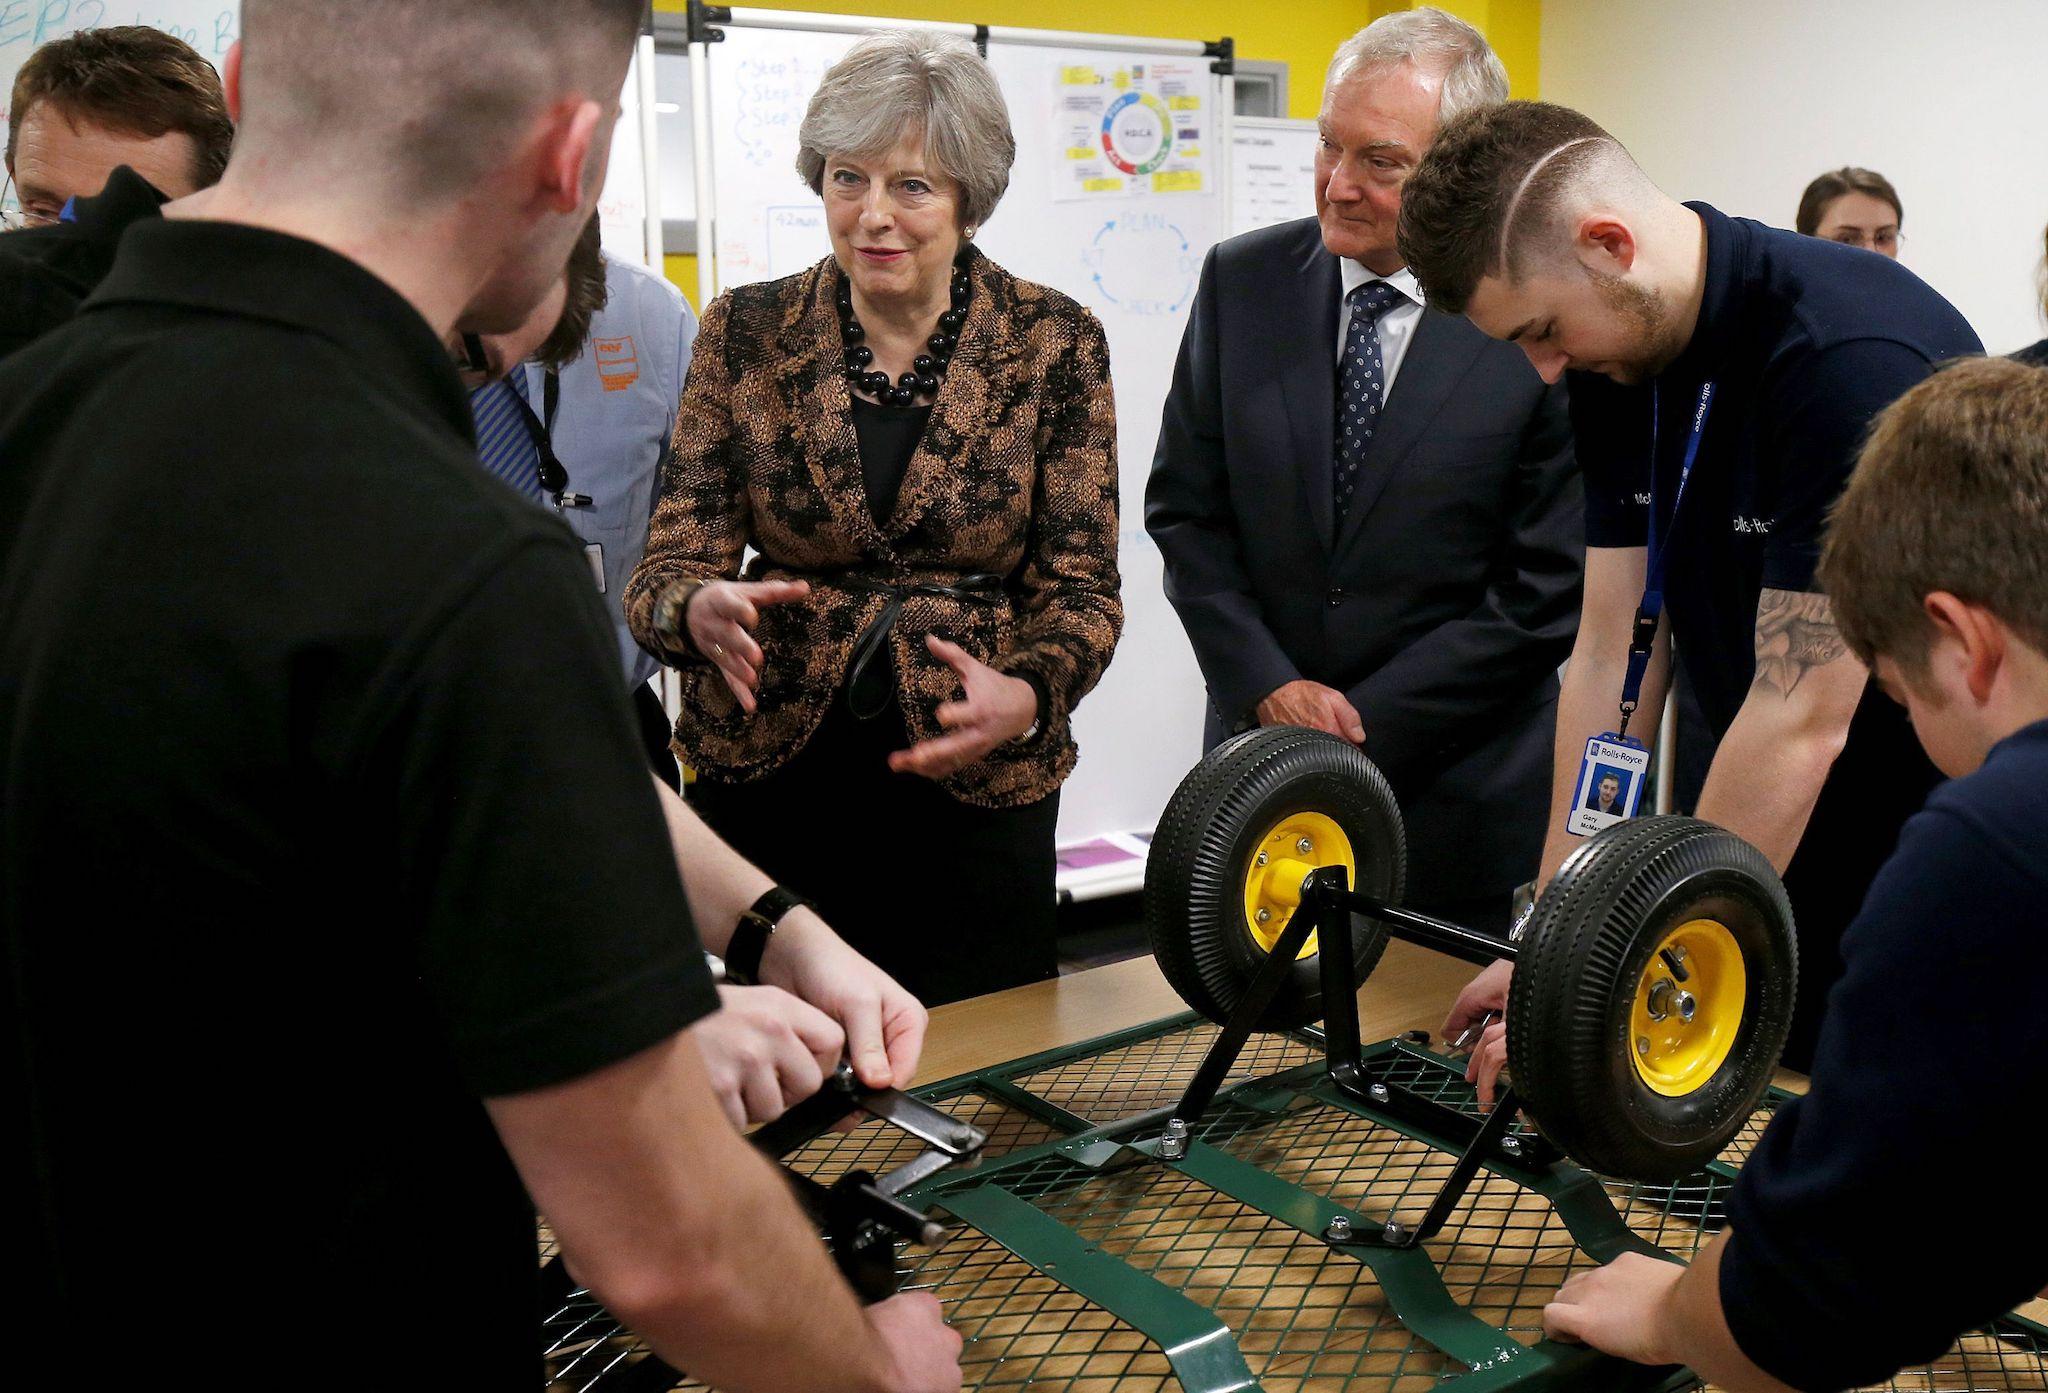 Theresa May is developing a 'hands on' approach to business concerns